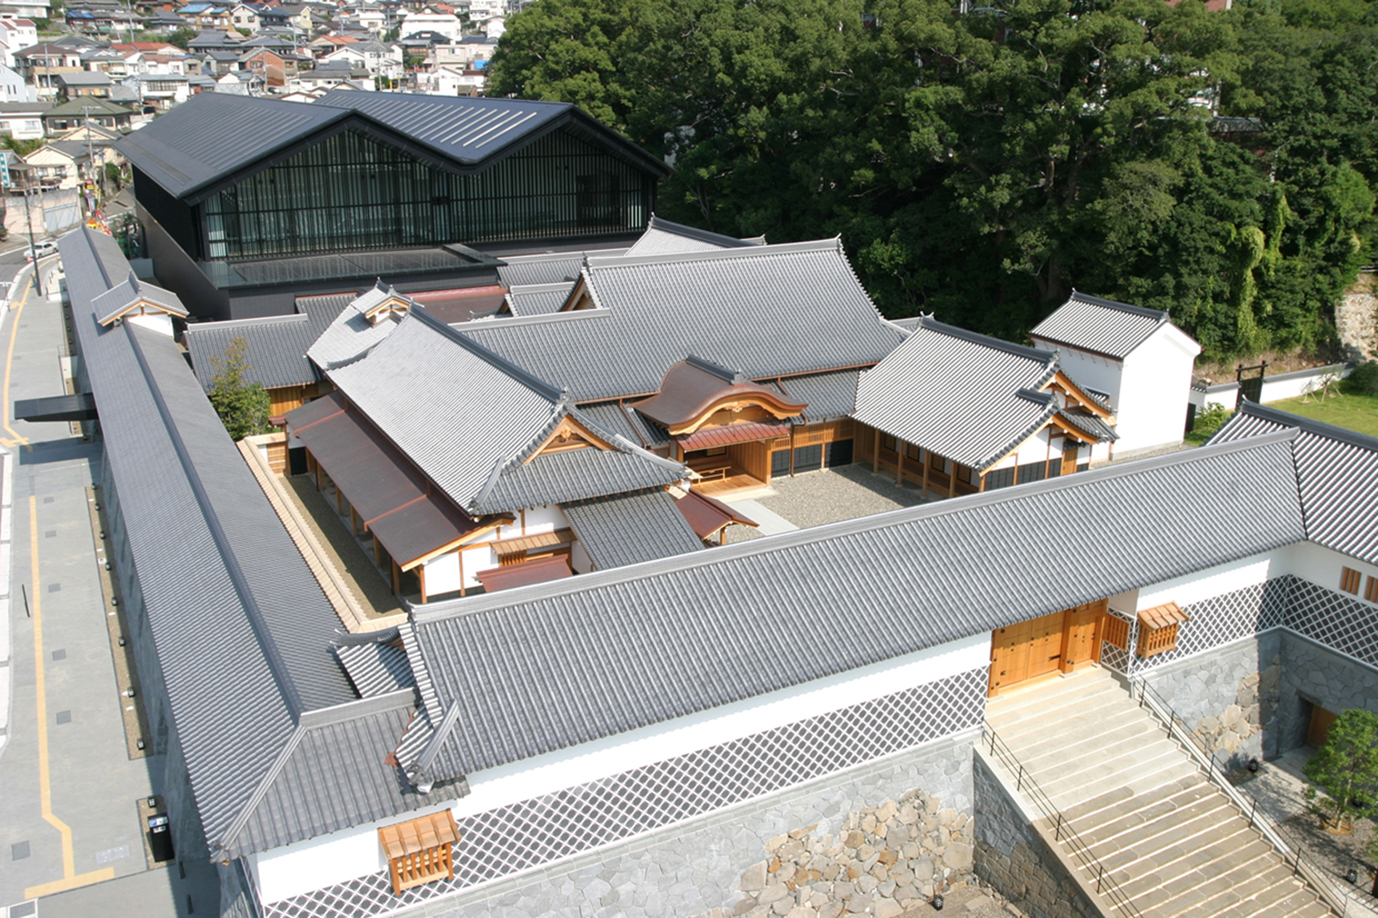 Nagasaki Museum of History and Culture